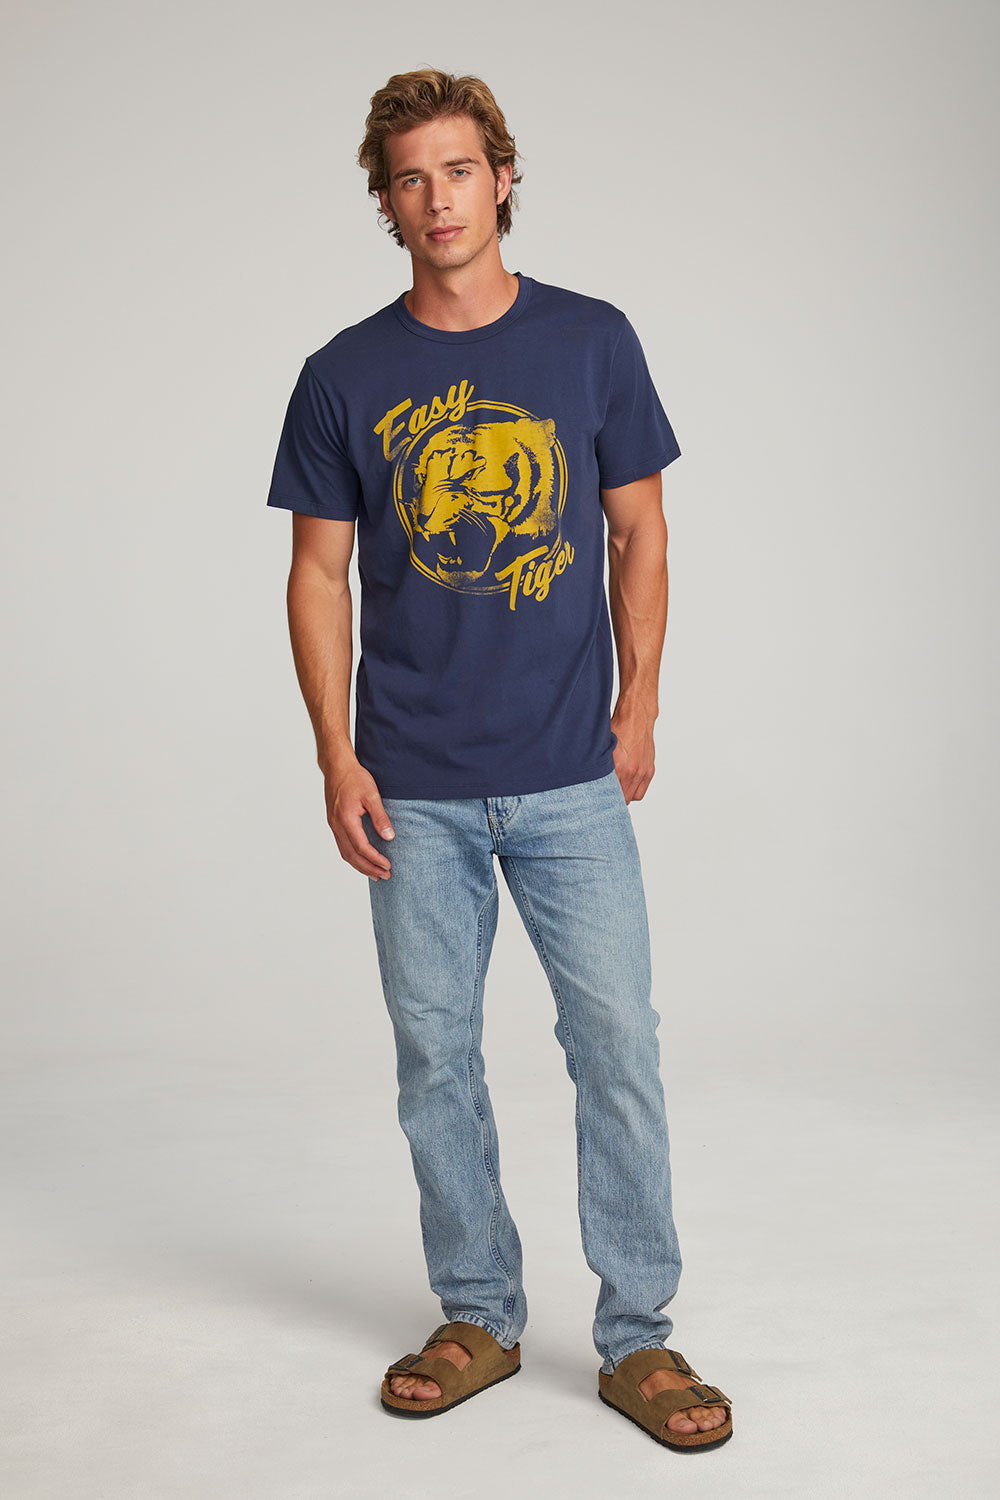 Easy Tiger Mens Tee MENS chaserbrand